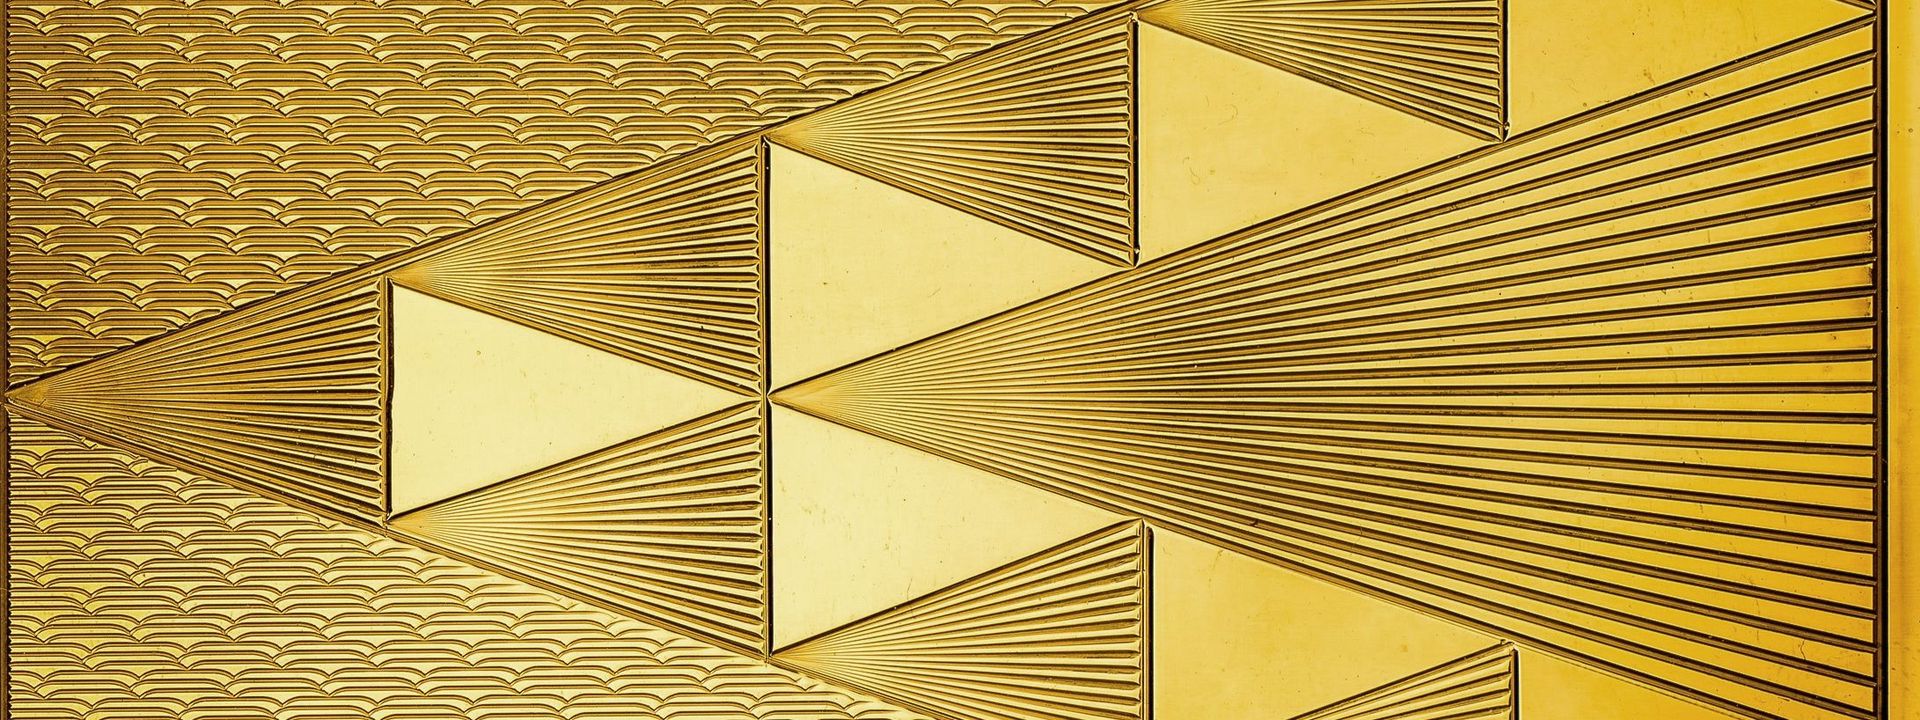 Close-up of a piece of shiny golden metal with geometric pattern engraving.